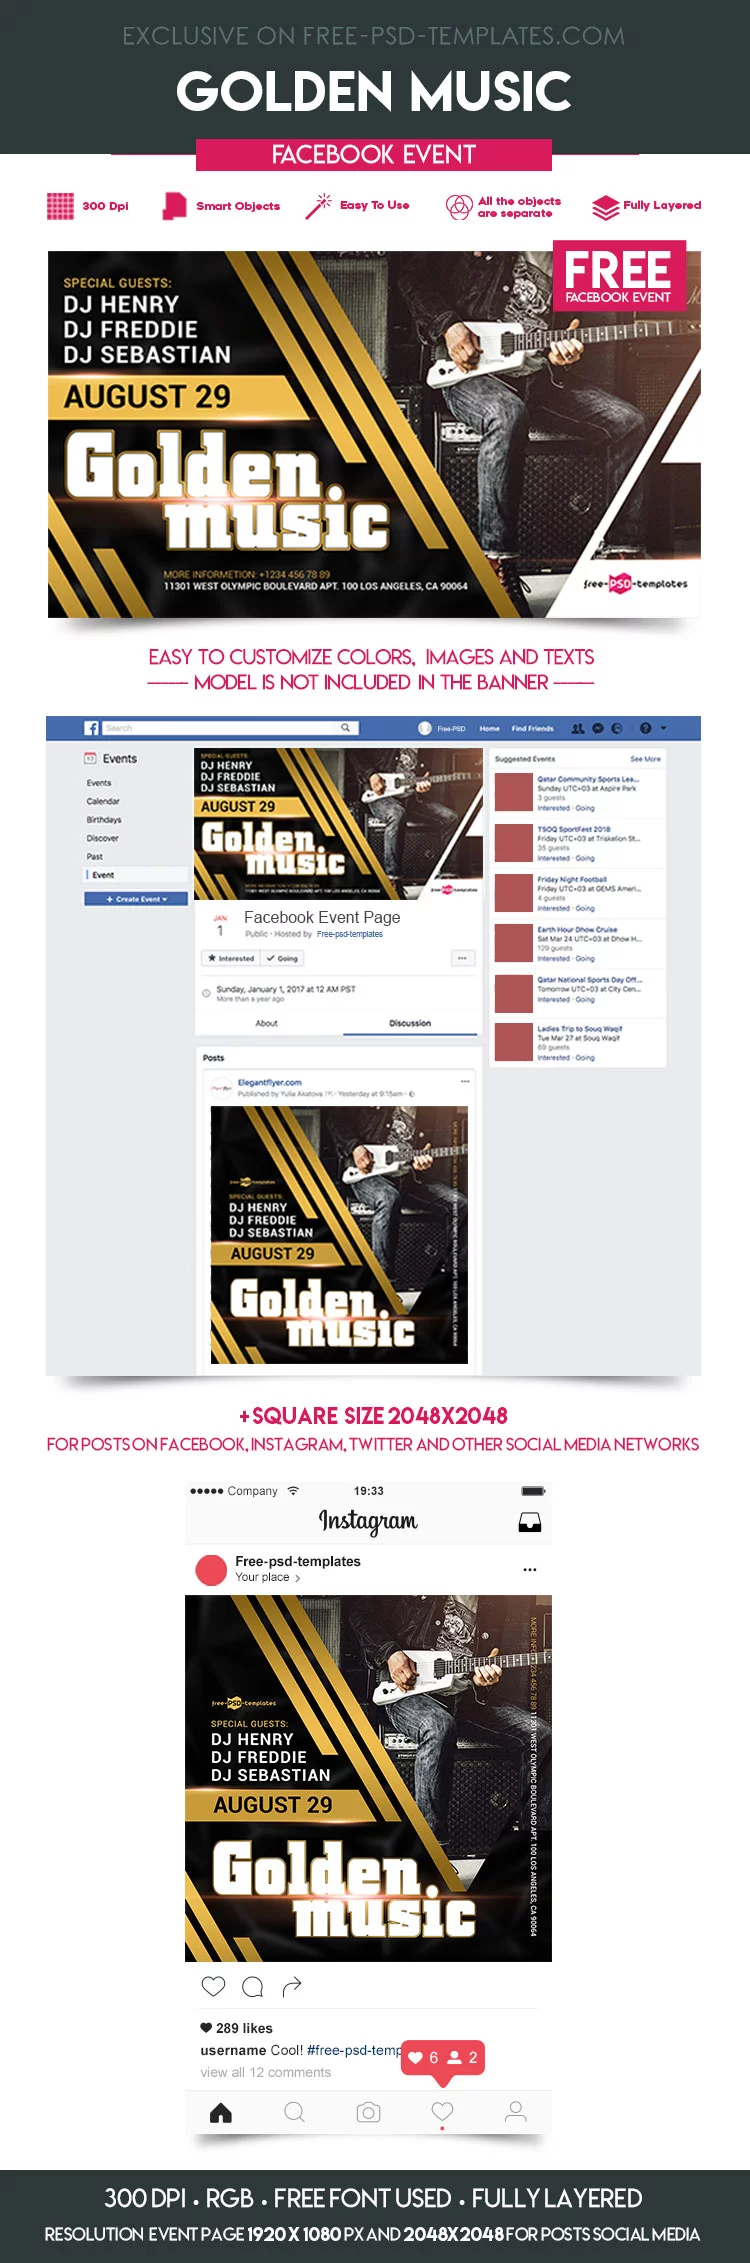 Free Golden Music Facebook Event Page